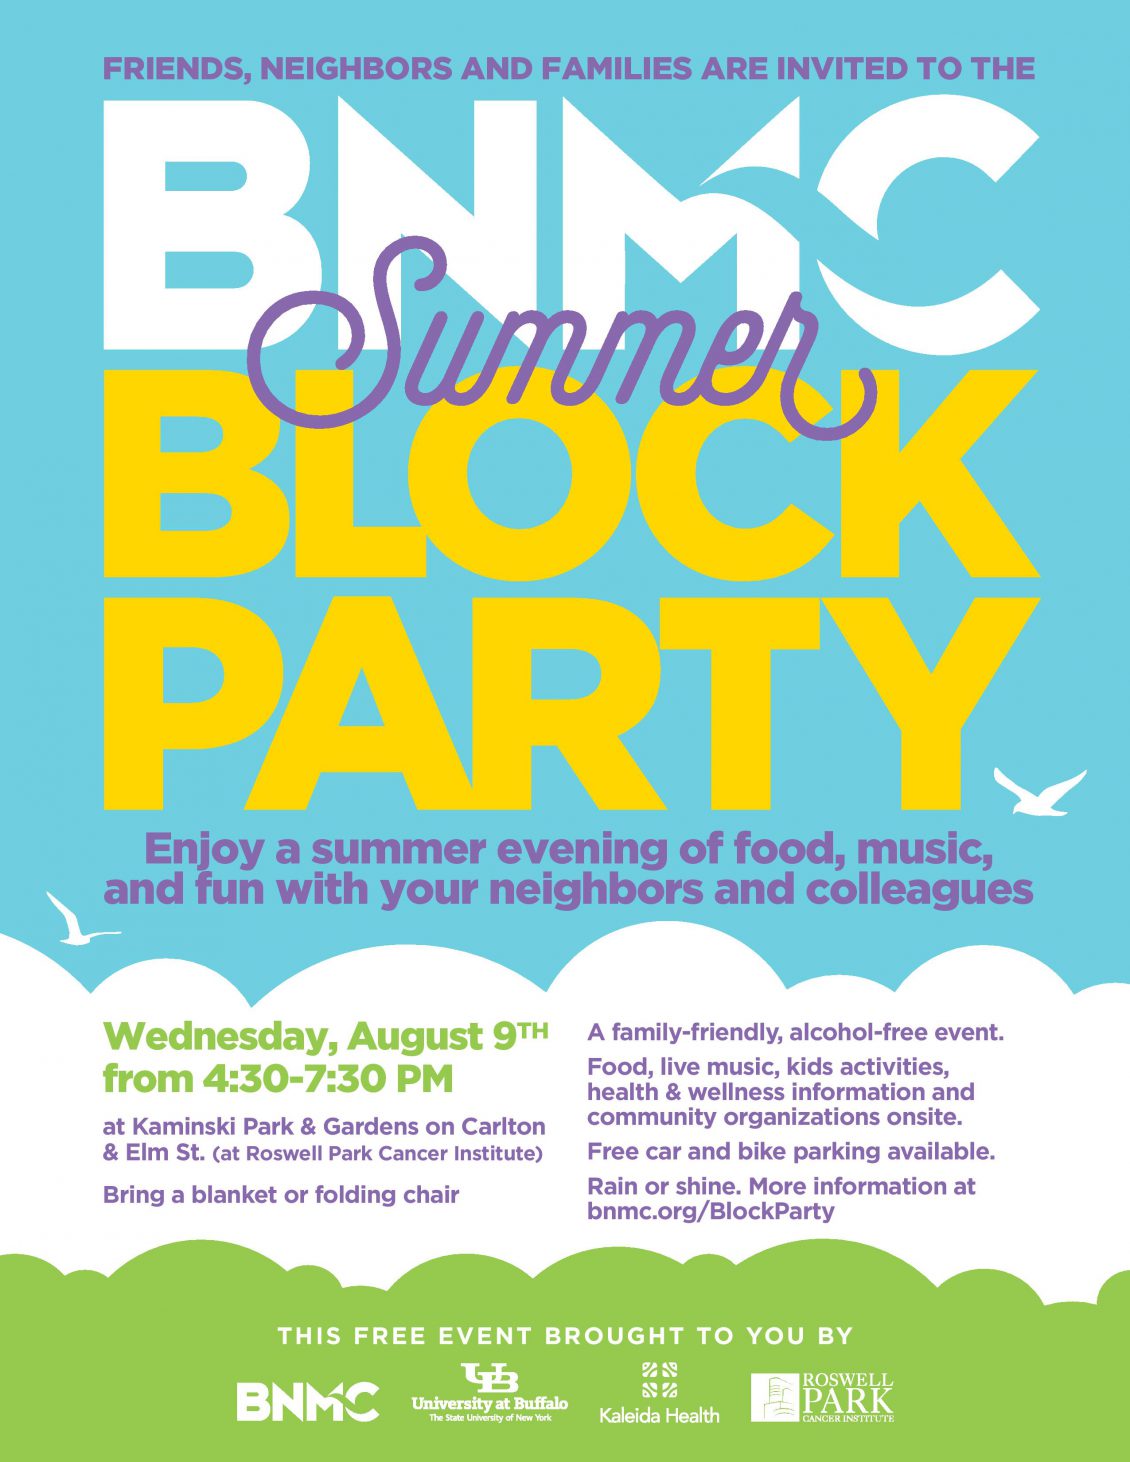 Save the Date! BNMC Summer Block Party on August 9th